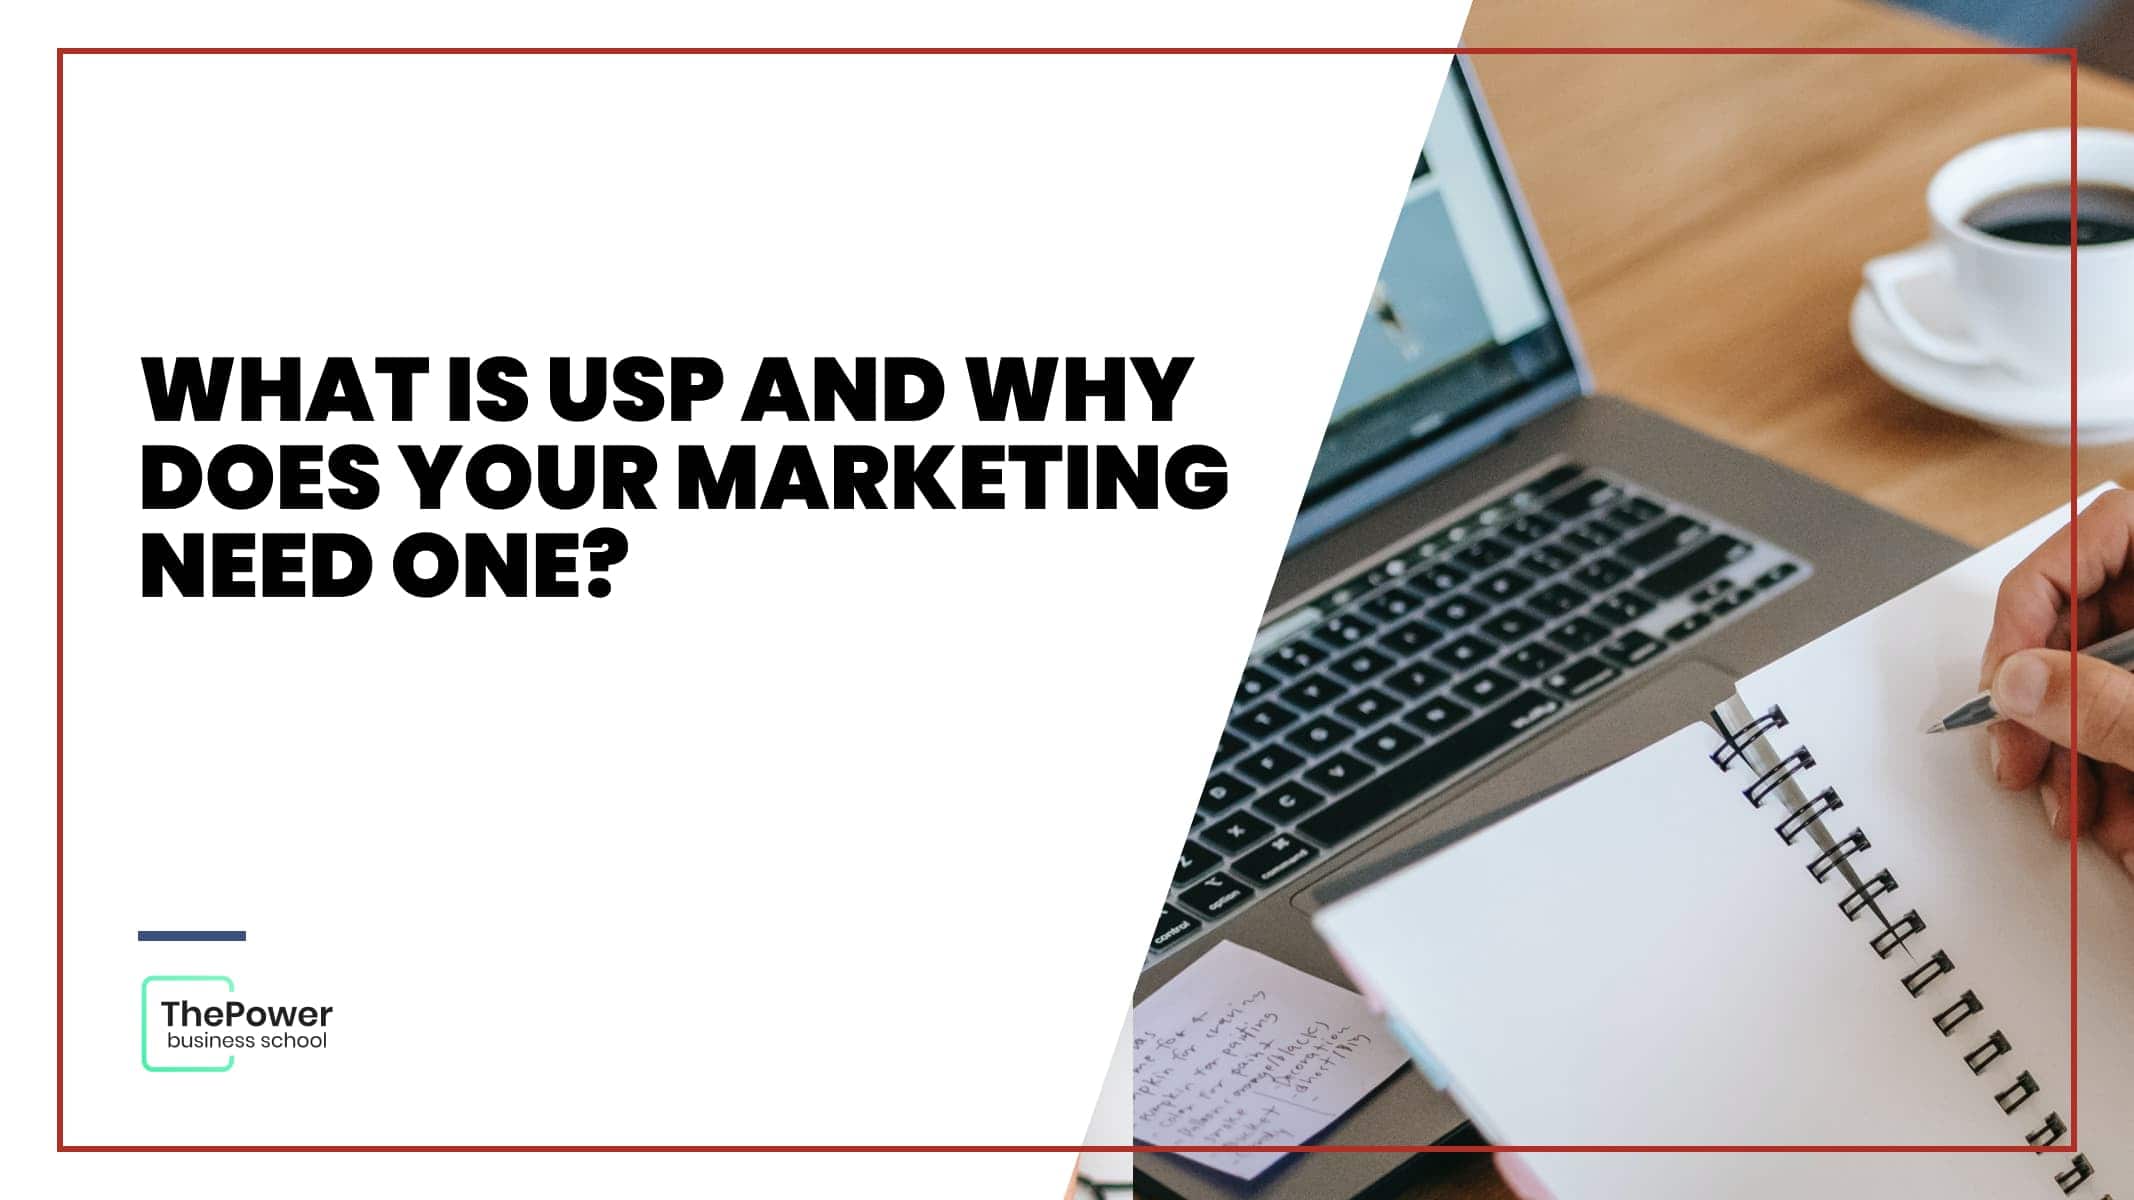 https://www.thepowermba.com/en/wp-content/uploads/2023/07/What-is-USP-and-why-does-your-marketing-need-one.jpg